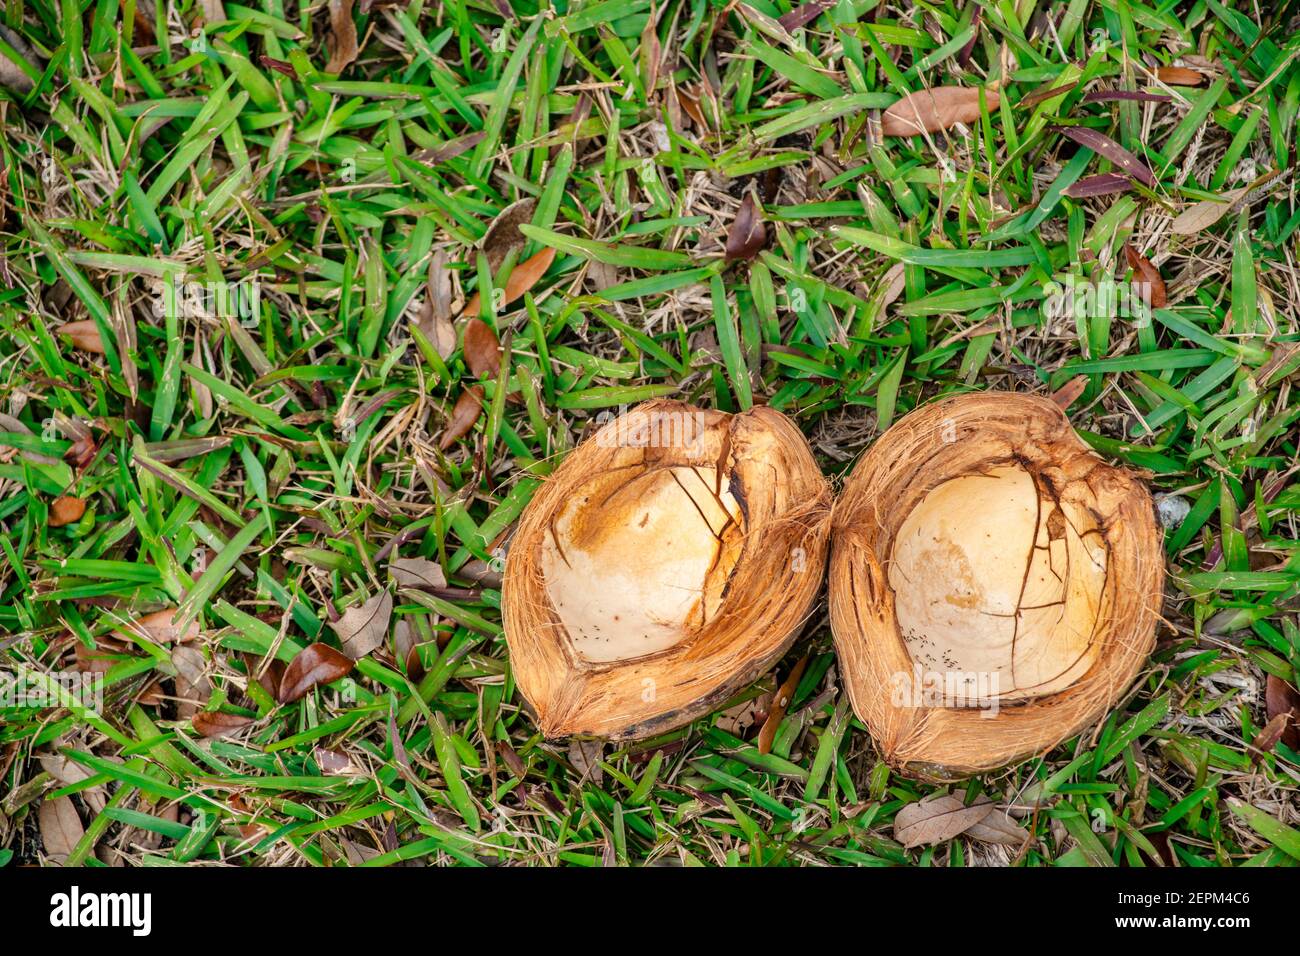 An opened coconut lies in the grass on the bank of Snapper Creek in Pinecrest, Florida. Stock Photo